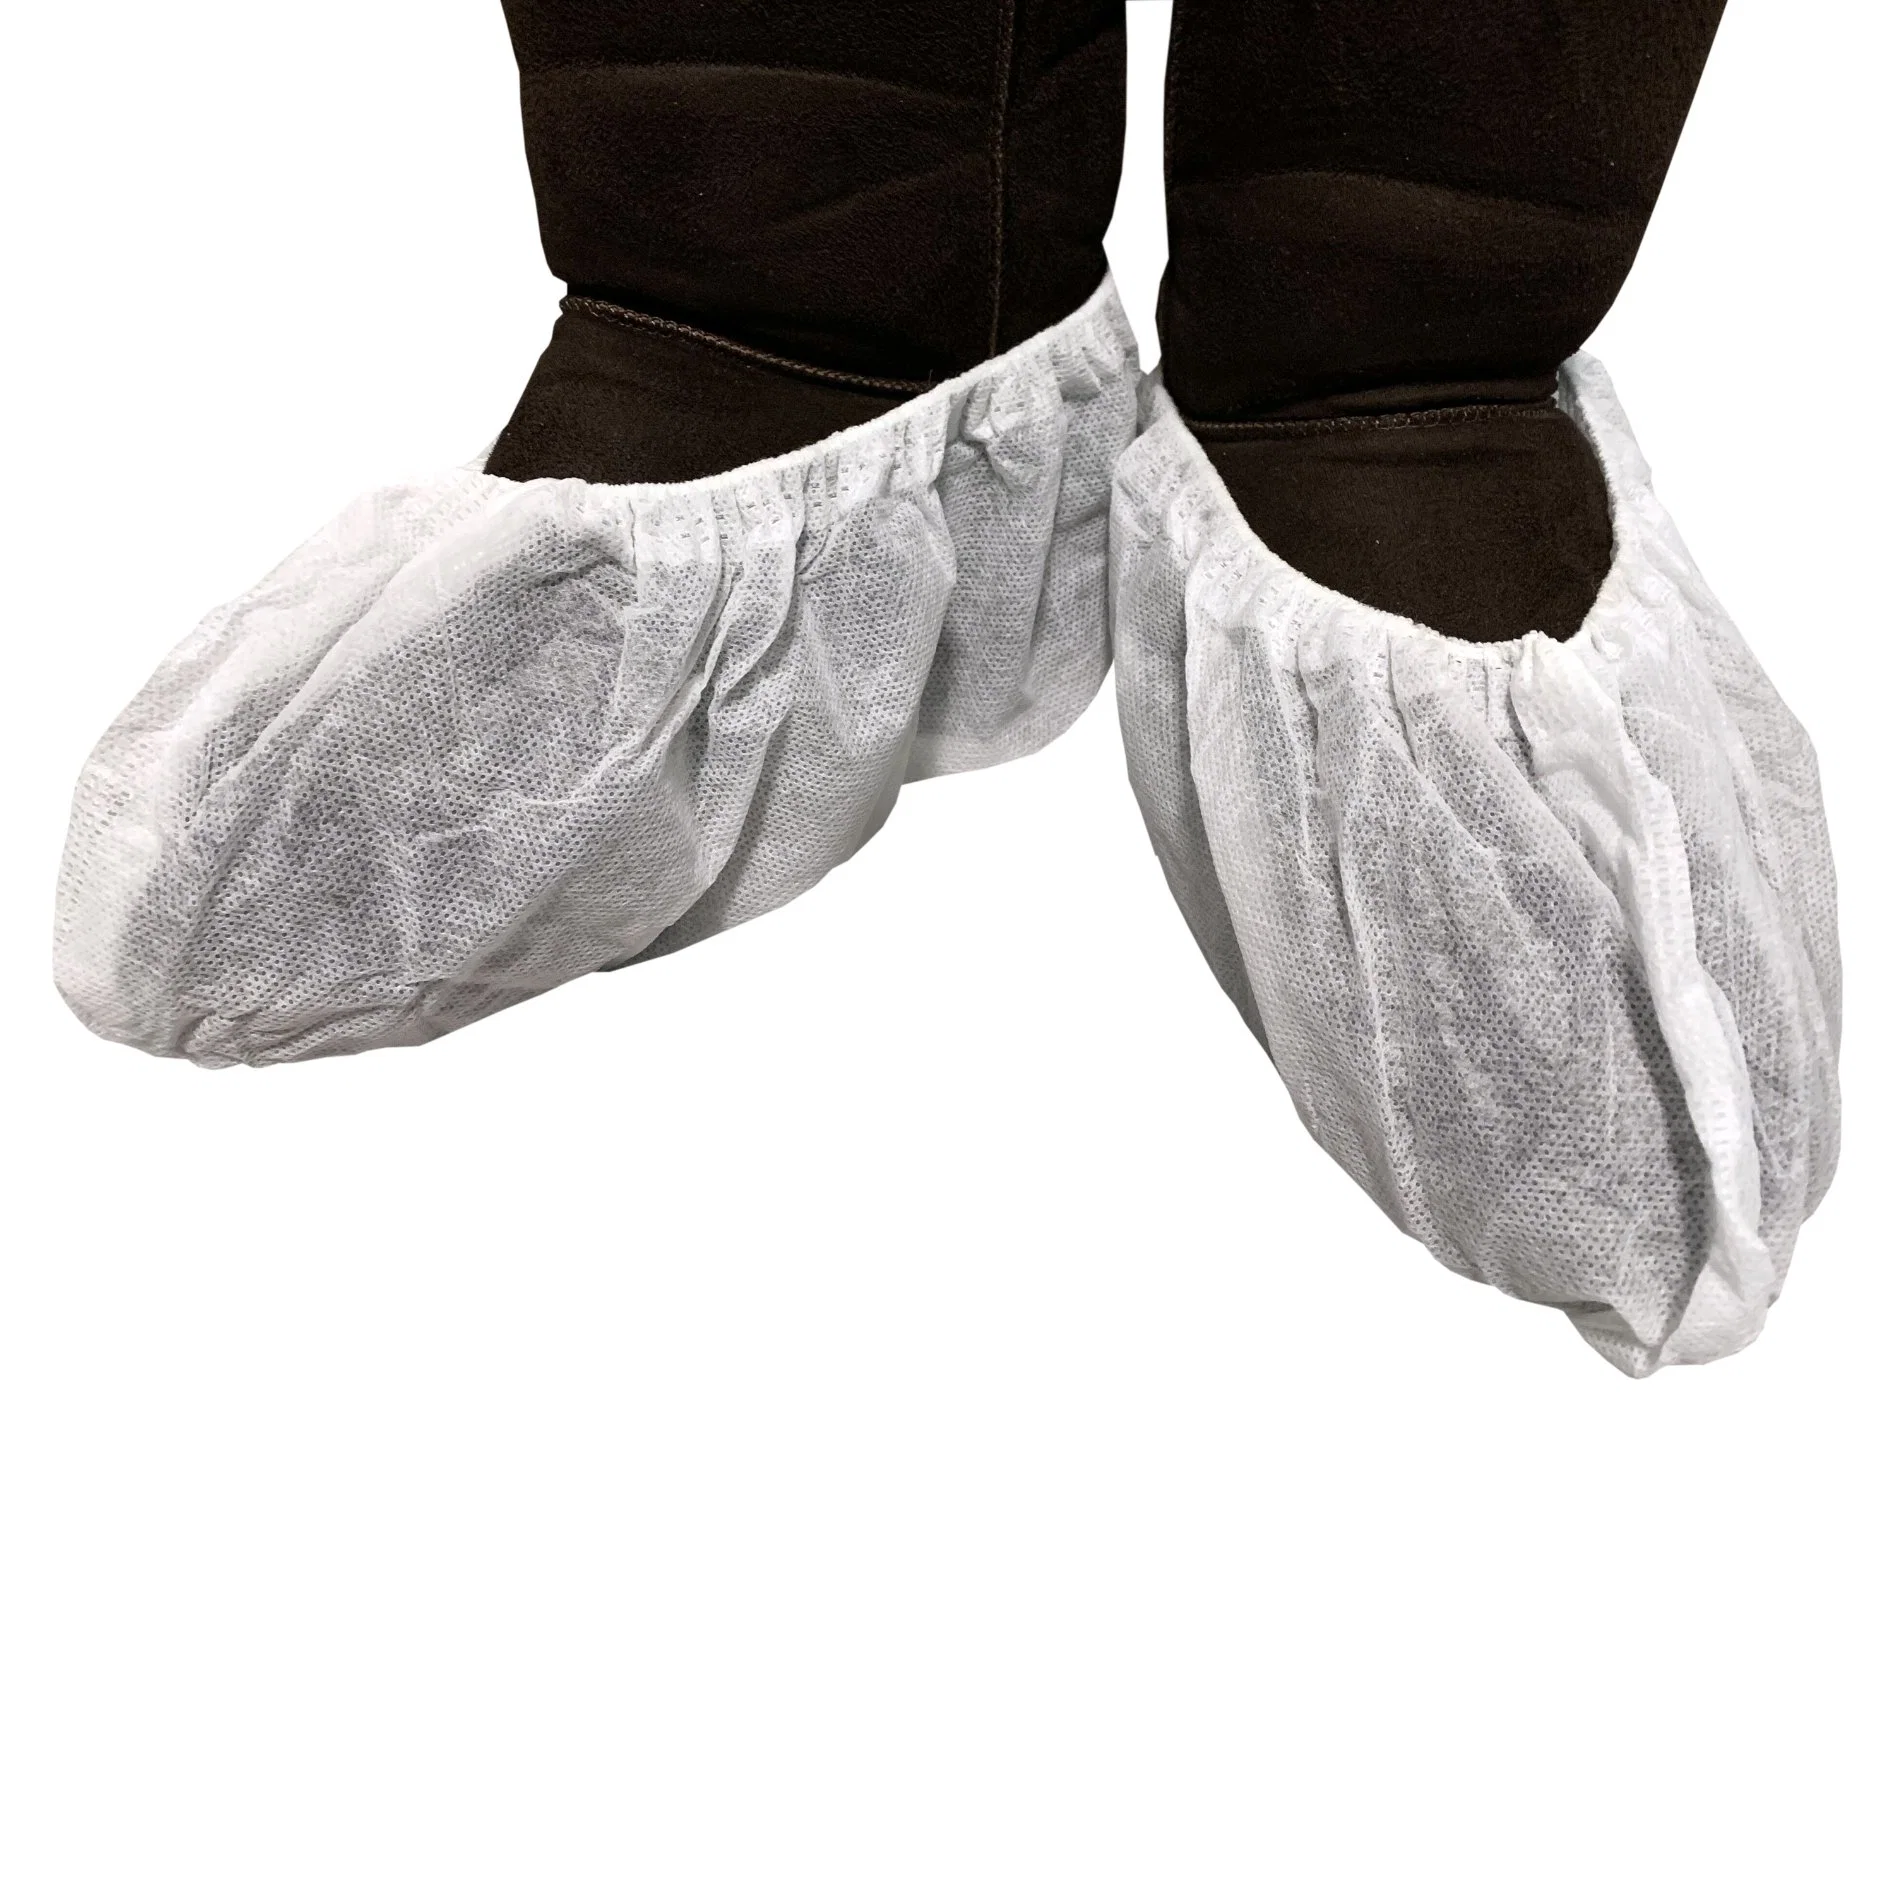 Disposable PE/CPE Shoe Cover Waterproof Shoe Cover